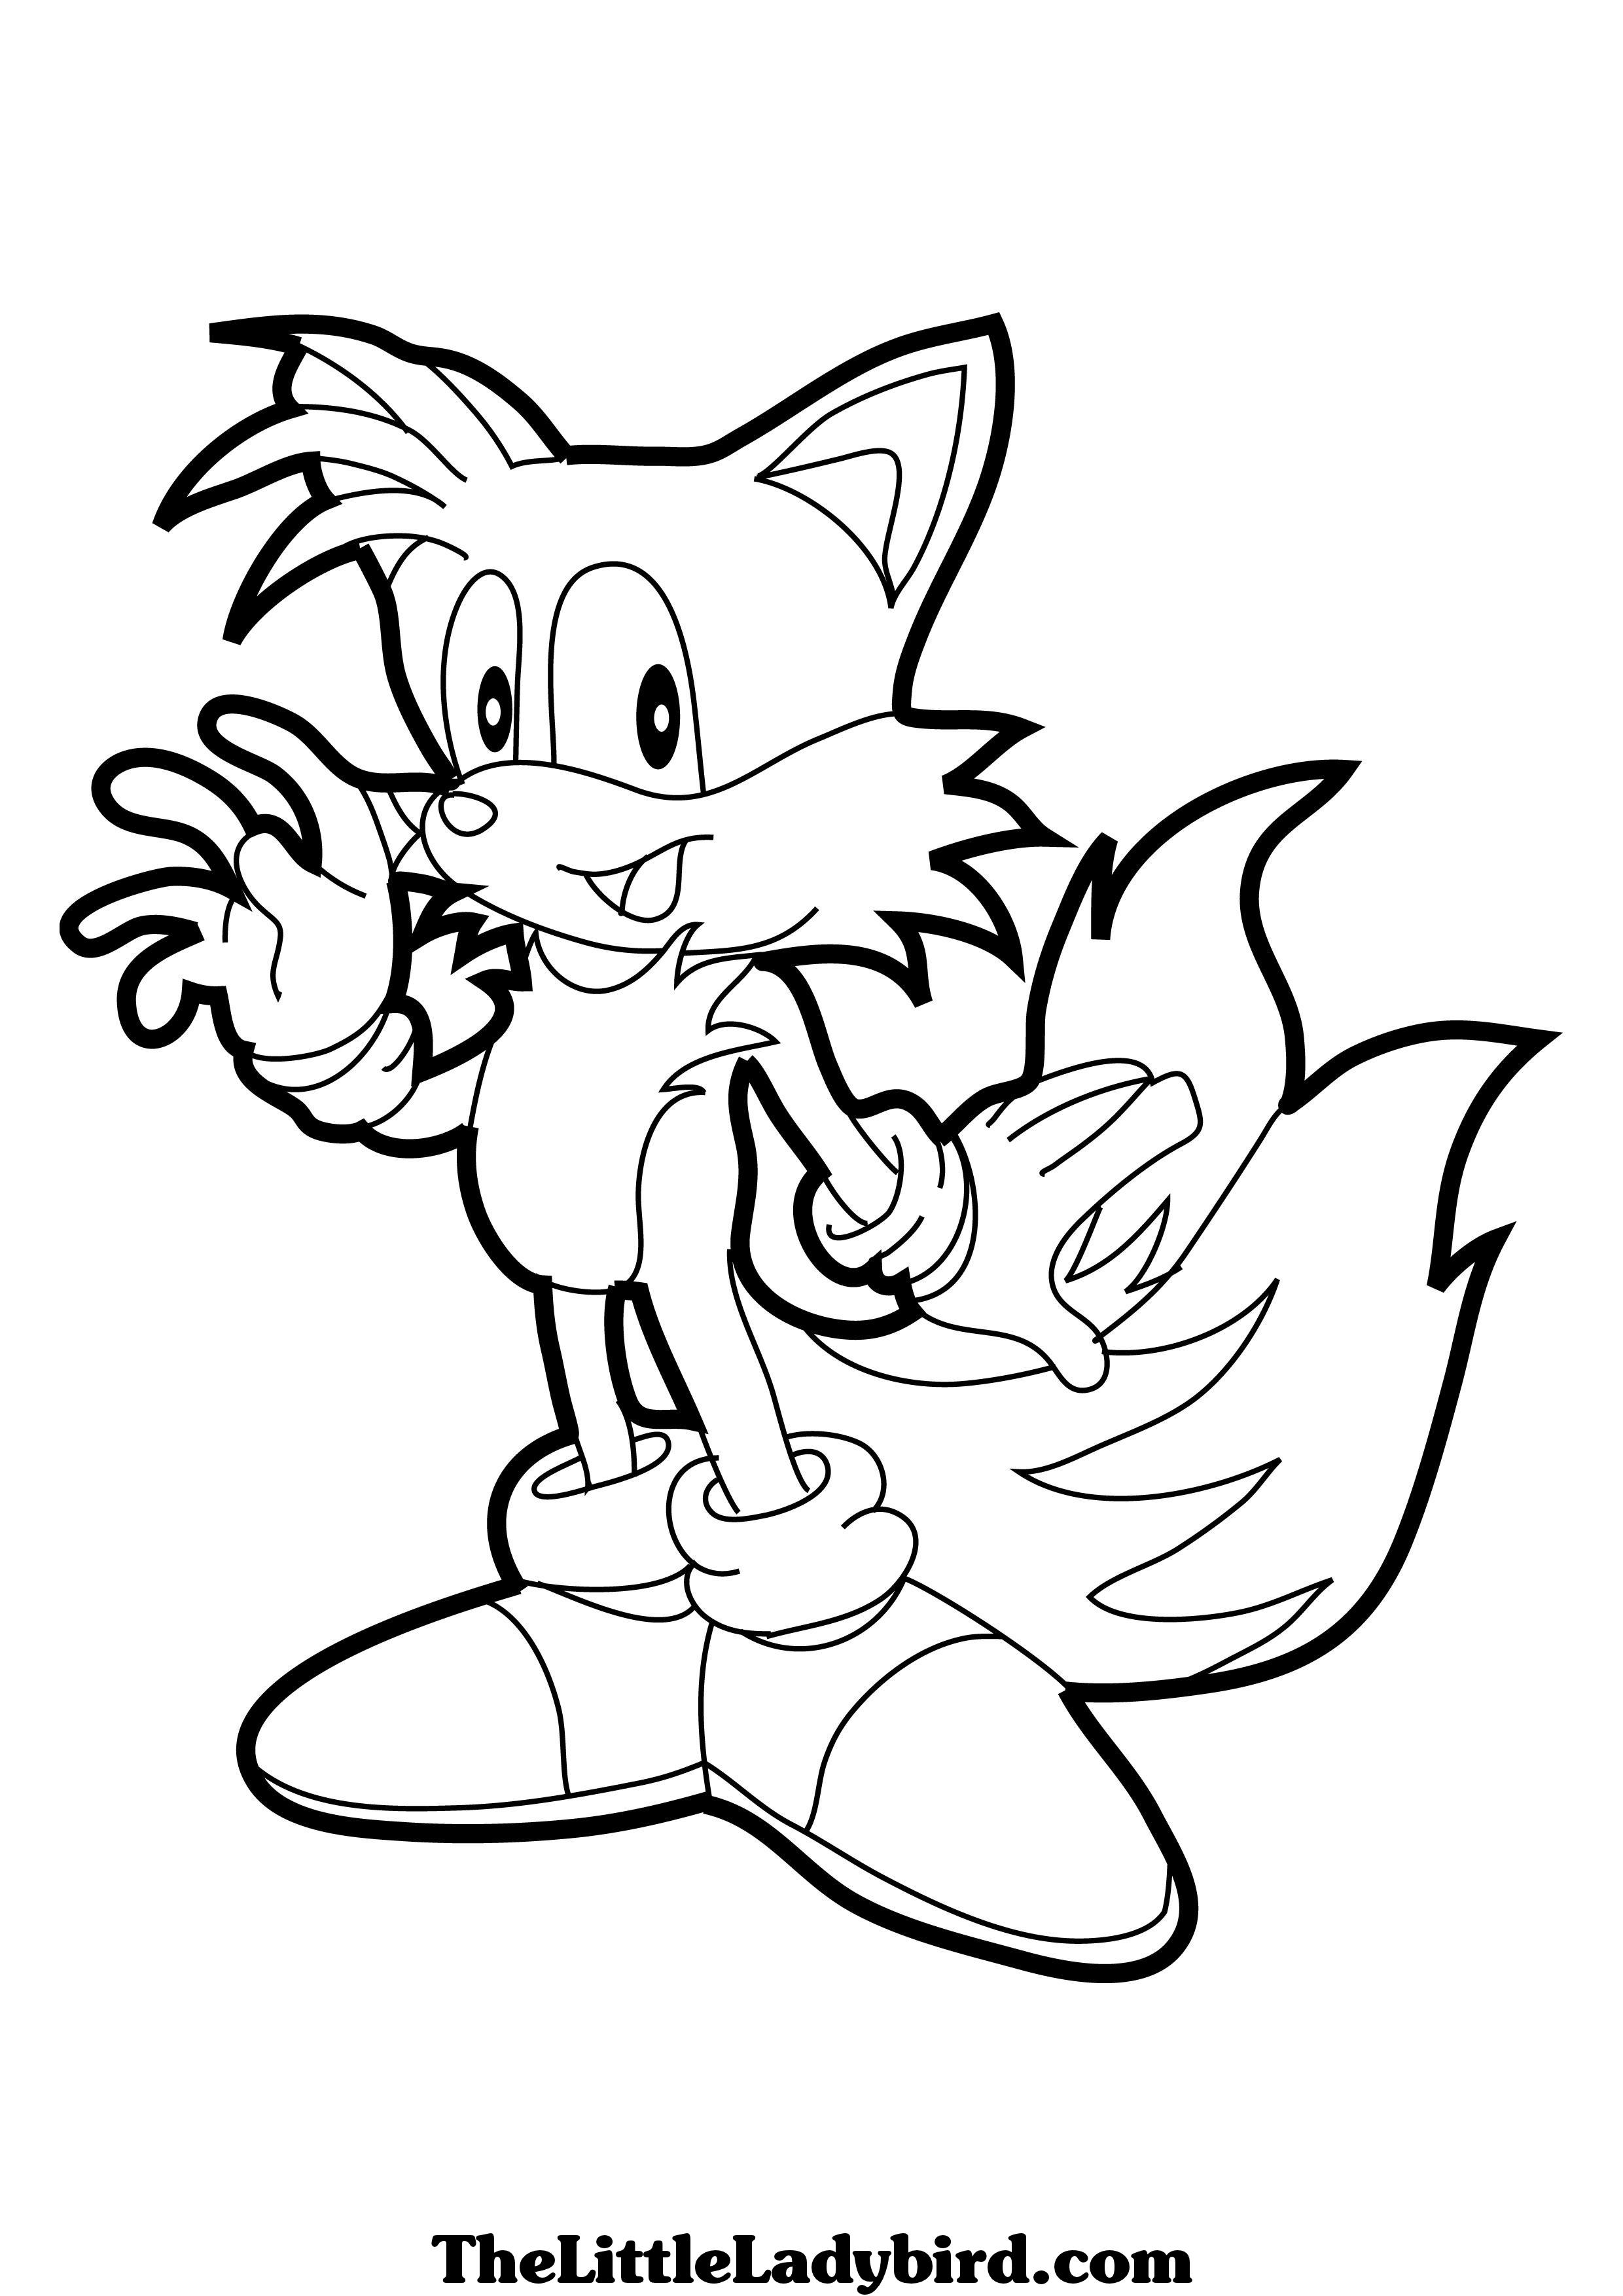  Sonic coloring pages | disney coloring pages for kids | color pages | coloring pages to print | kids coloring pages | #37